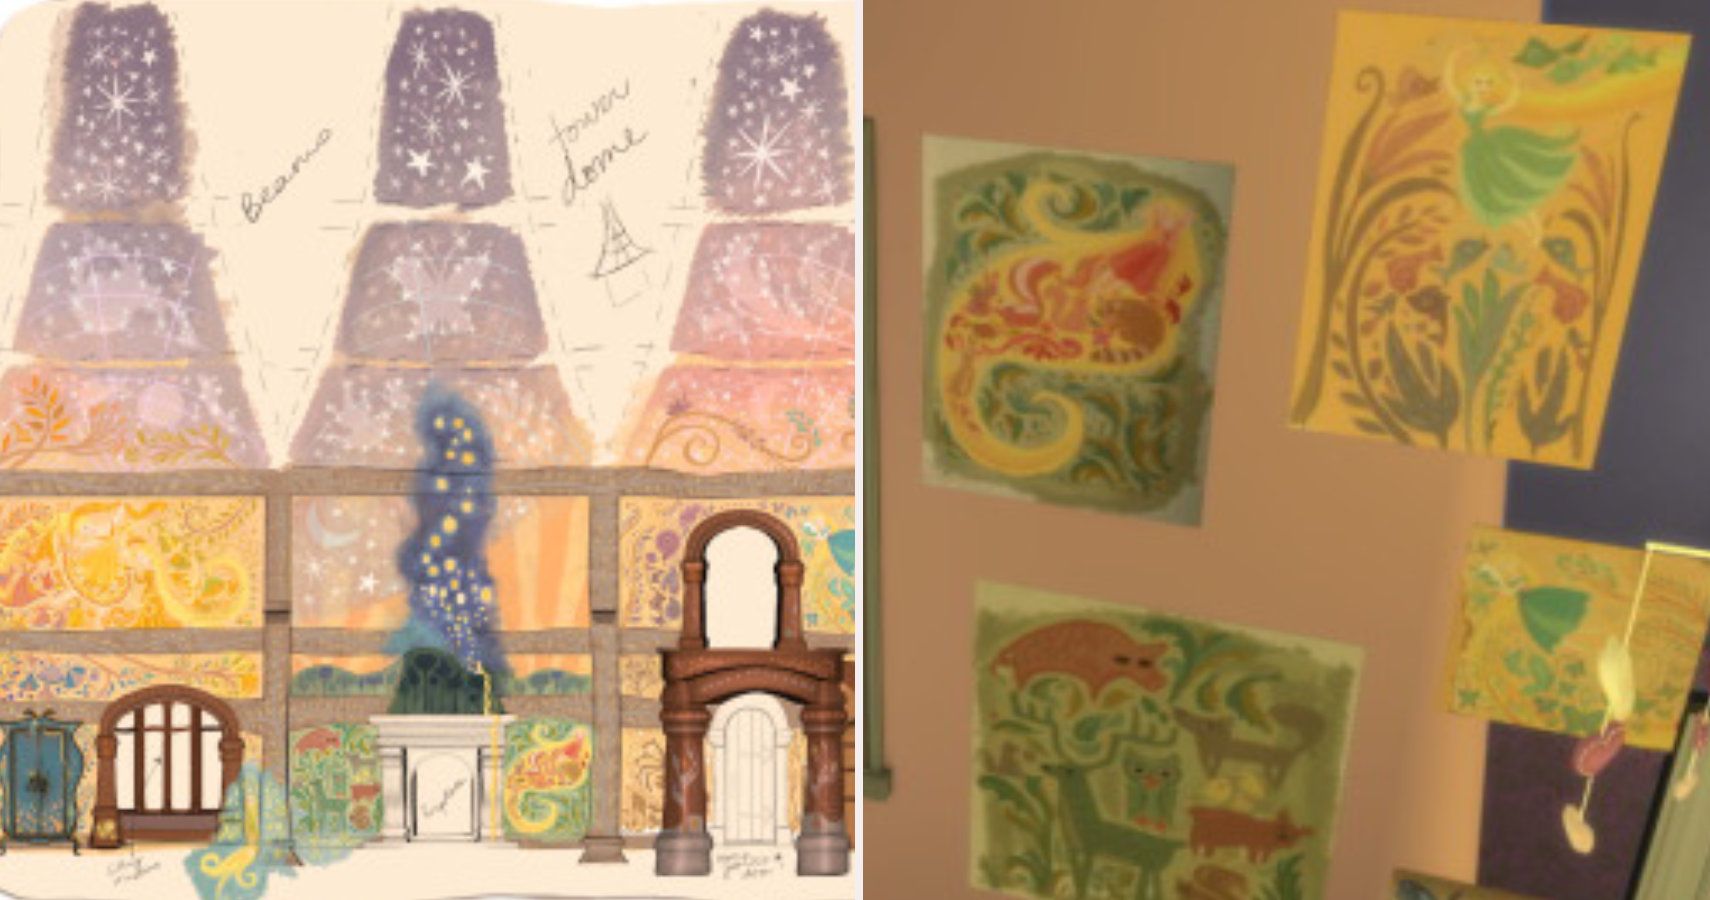 split image. On the left decals of tower blueprints, on the right tangled posters on a wall.